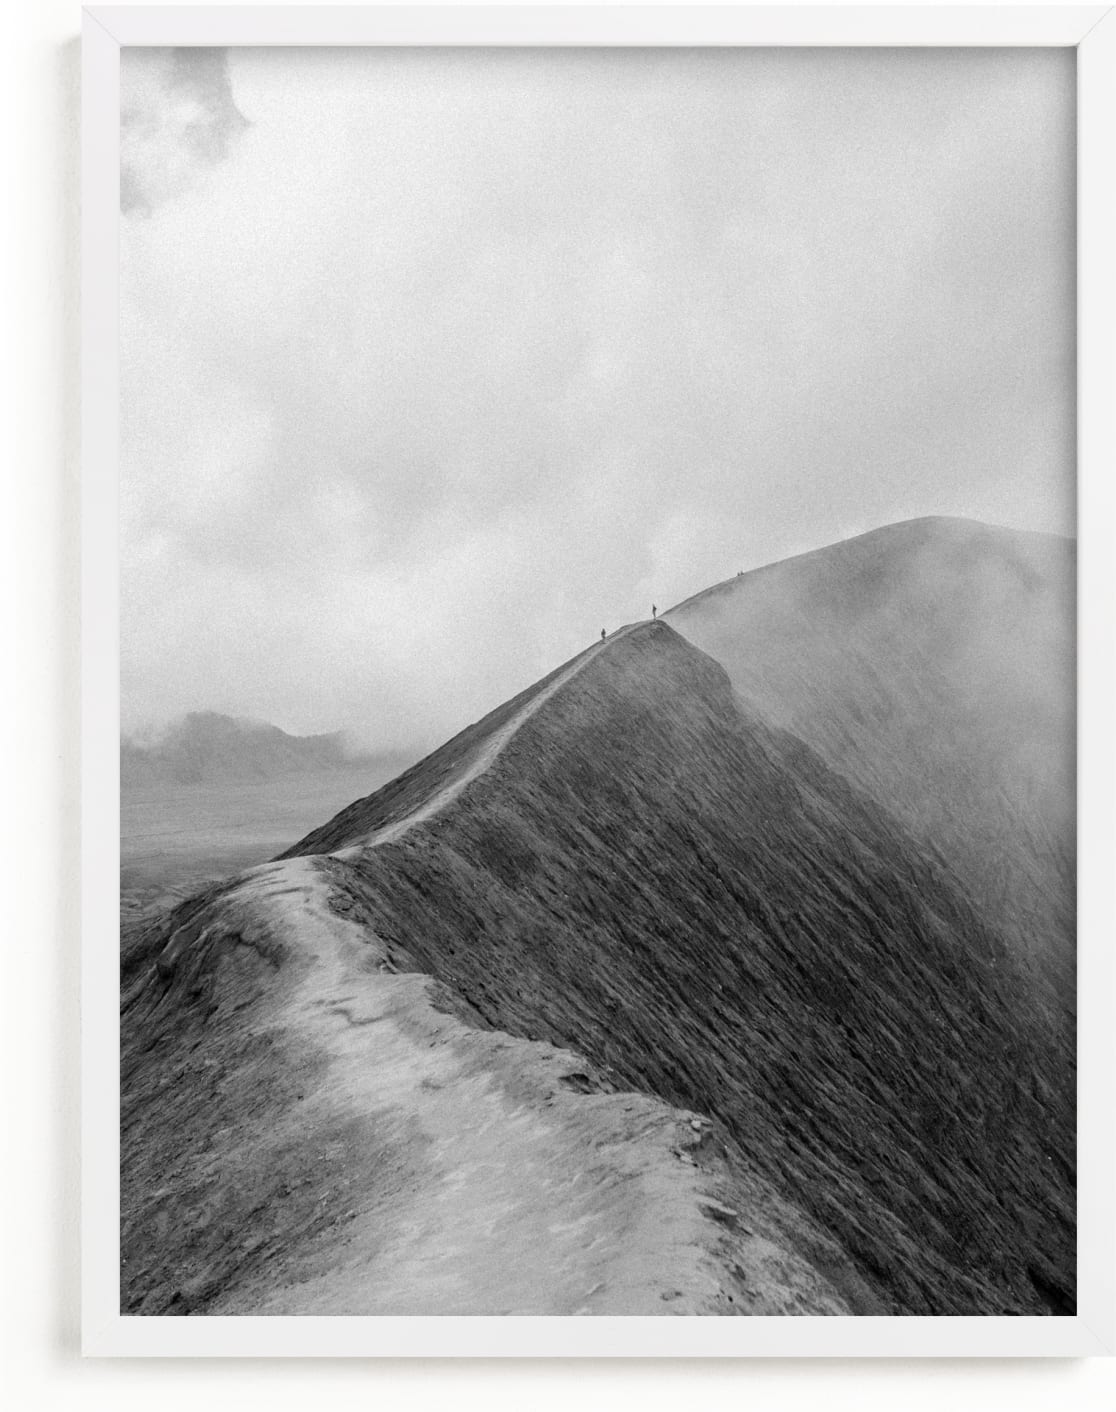 This is a black and white art by Marianne Brouwer called Mighty Mount Bromo.